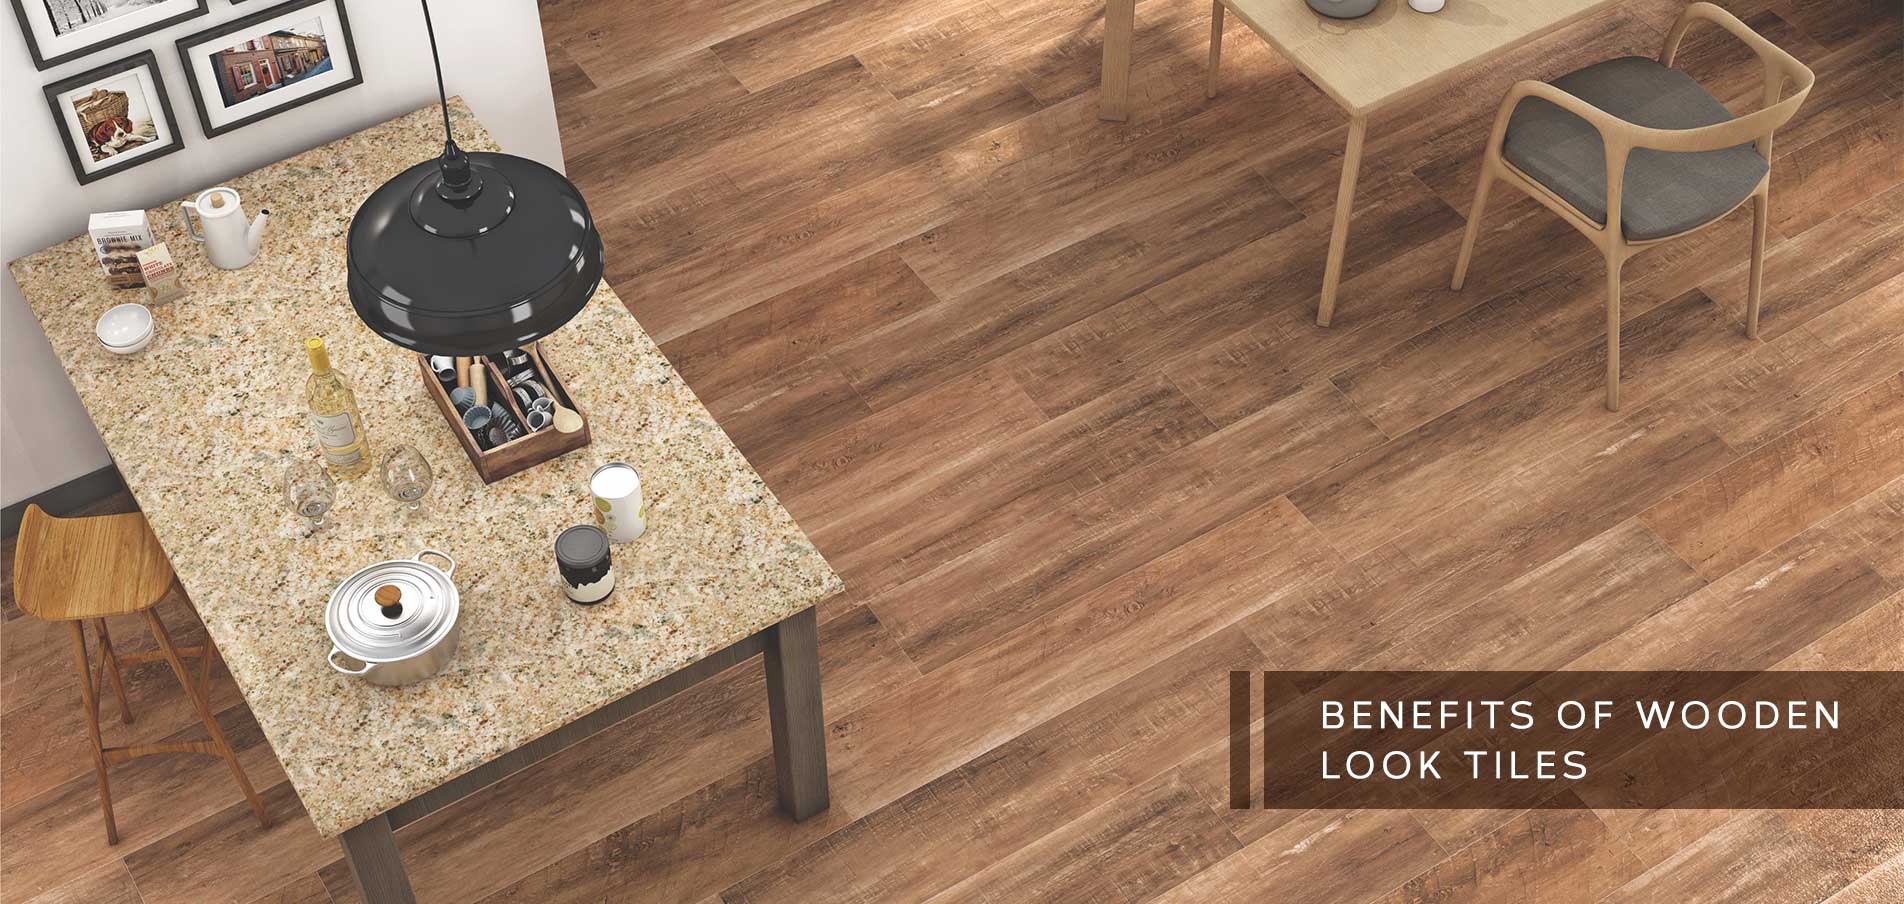 Discover the Benefits of Wooden Look Tiles at Simpolo